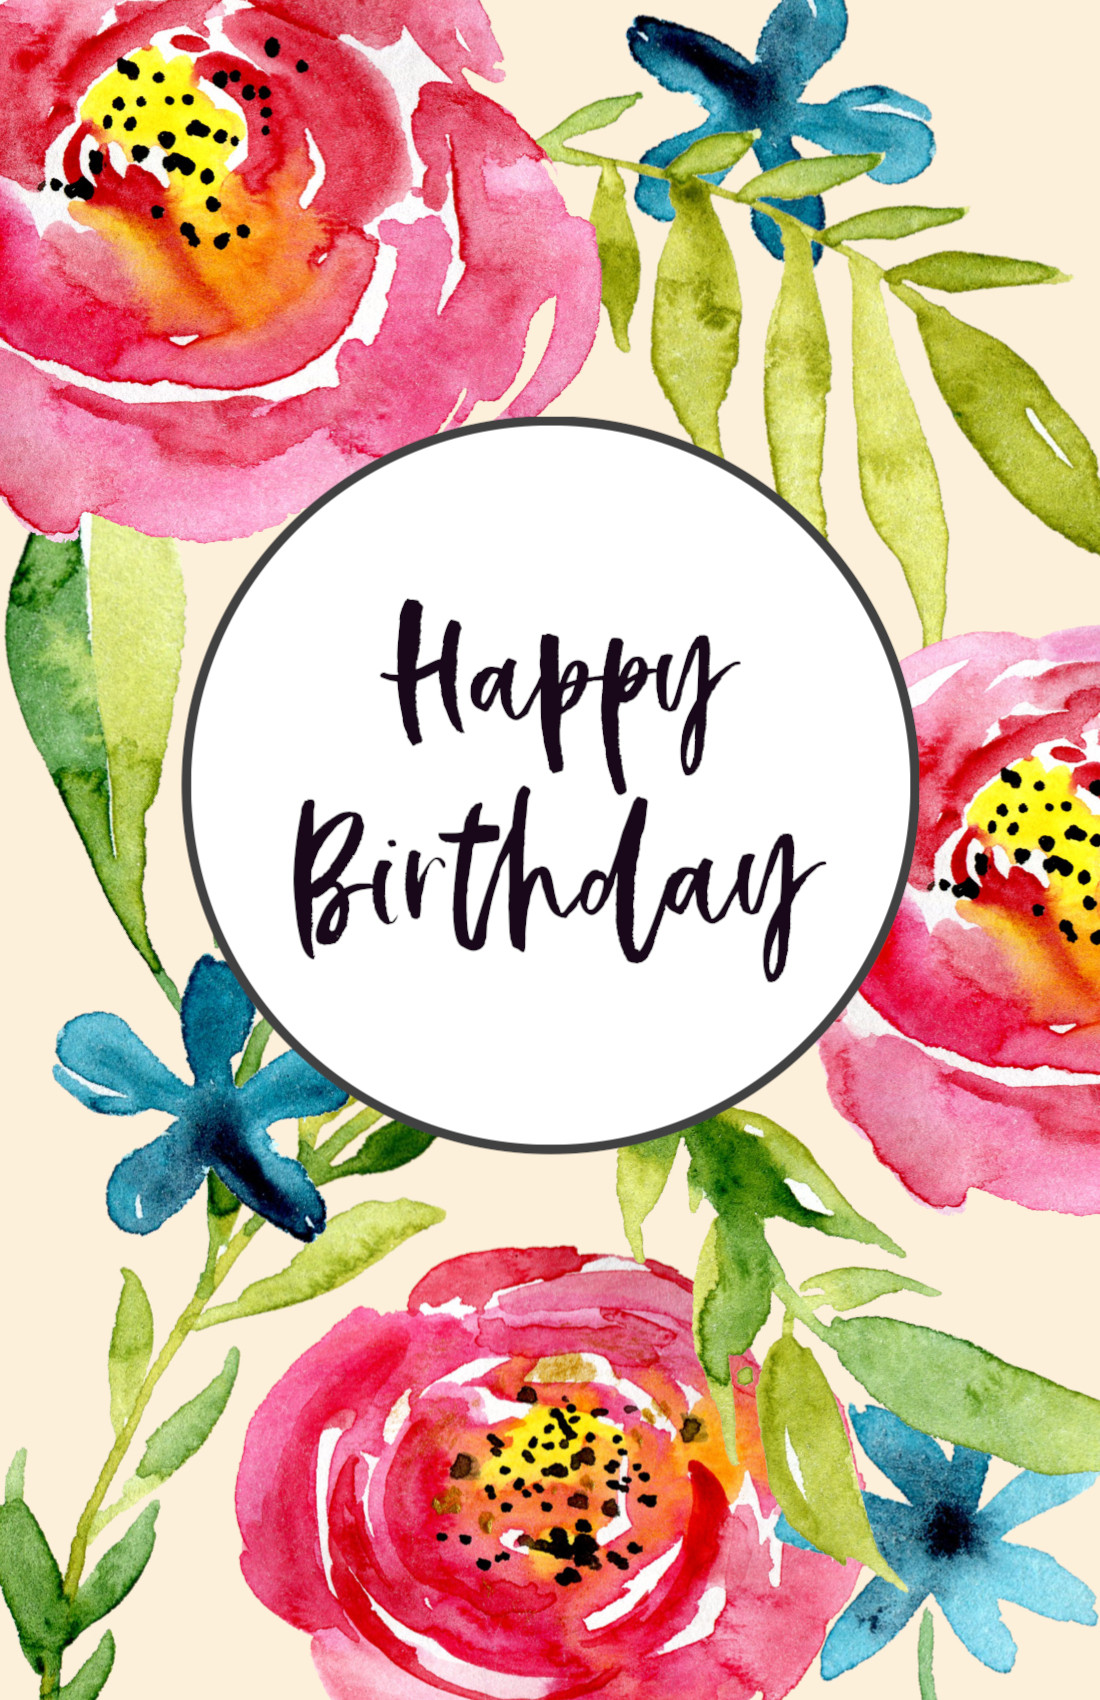 Happy Birthday Free Cards
 Free Printable Birthday Cards Paper Trail Design